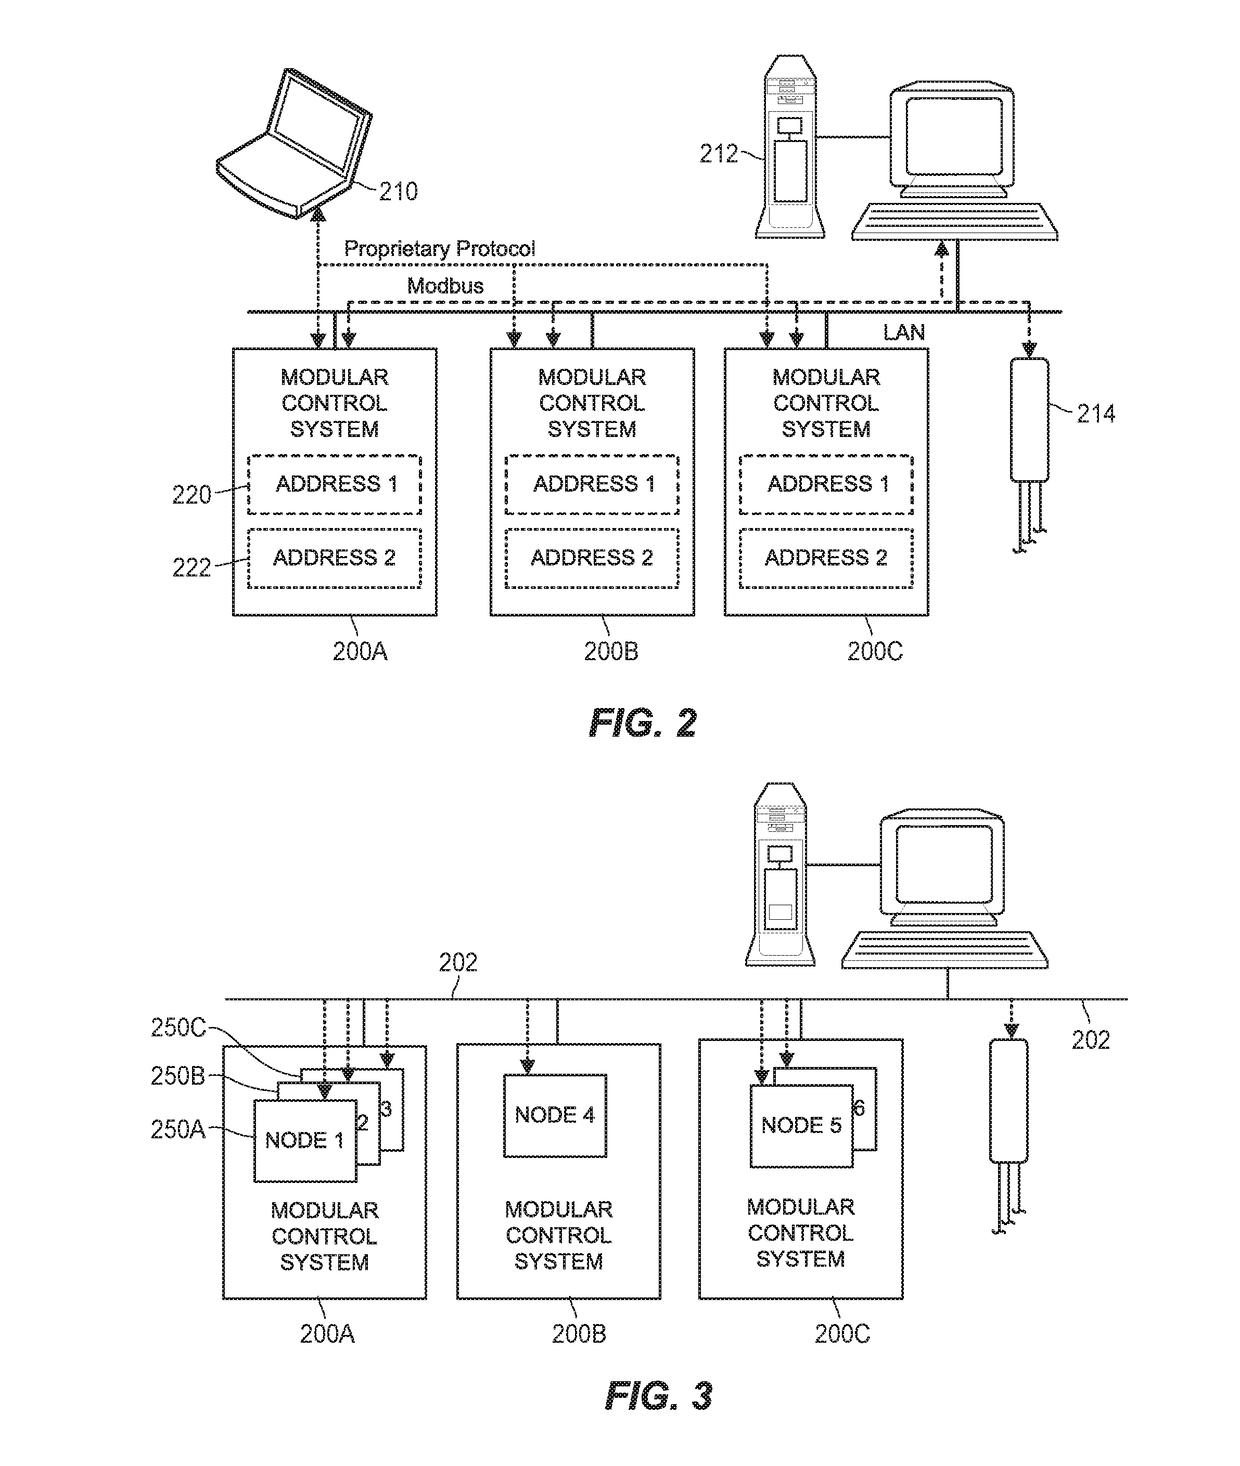 Systems and Methods for Merging Modular Control Systems into a Process Plant